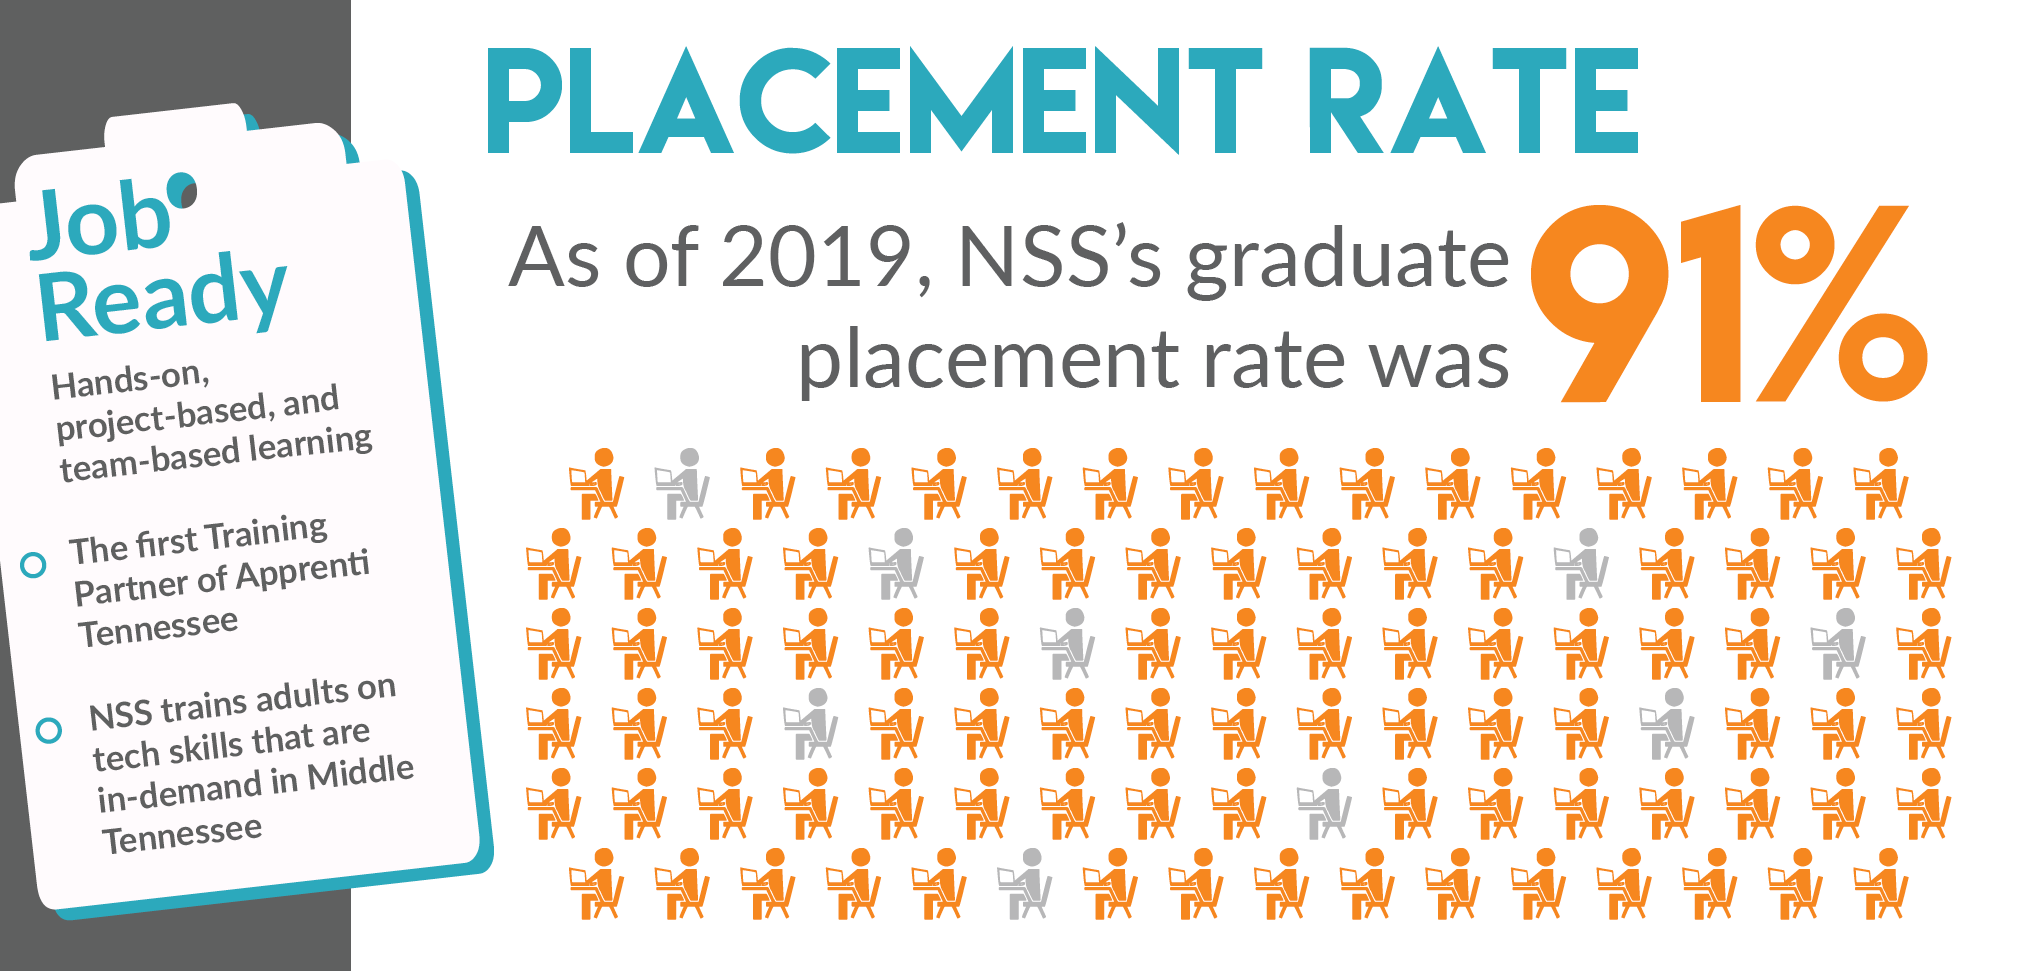 Placement Rate - As of 2019, NSS's graduate placement rate was 91%